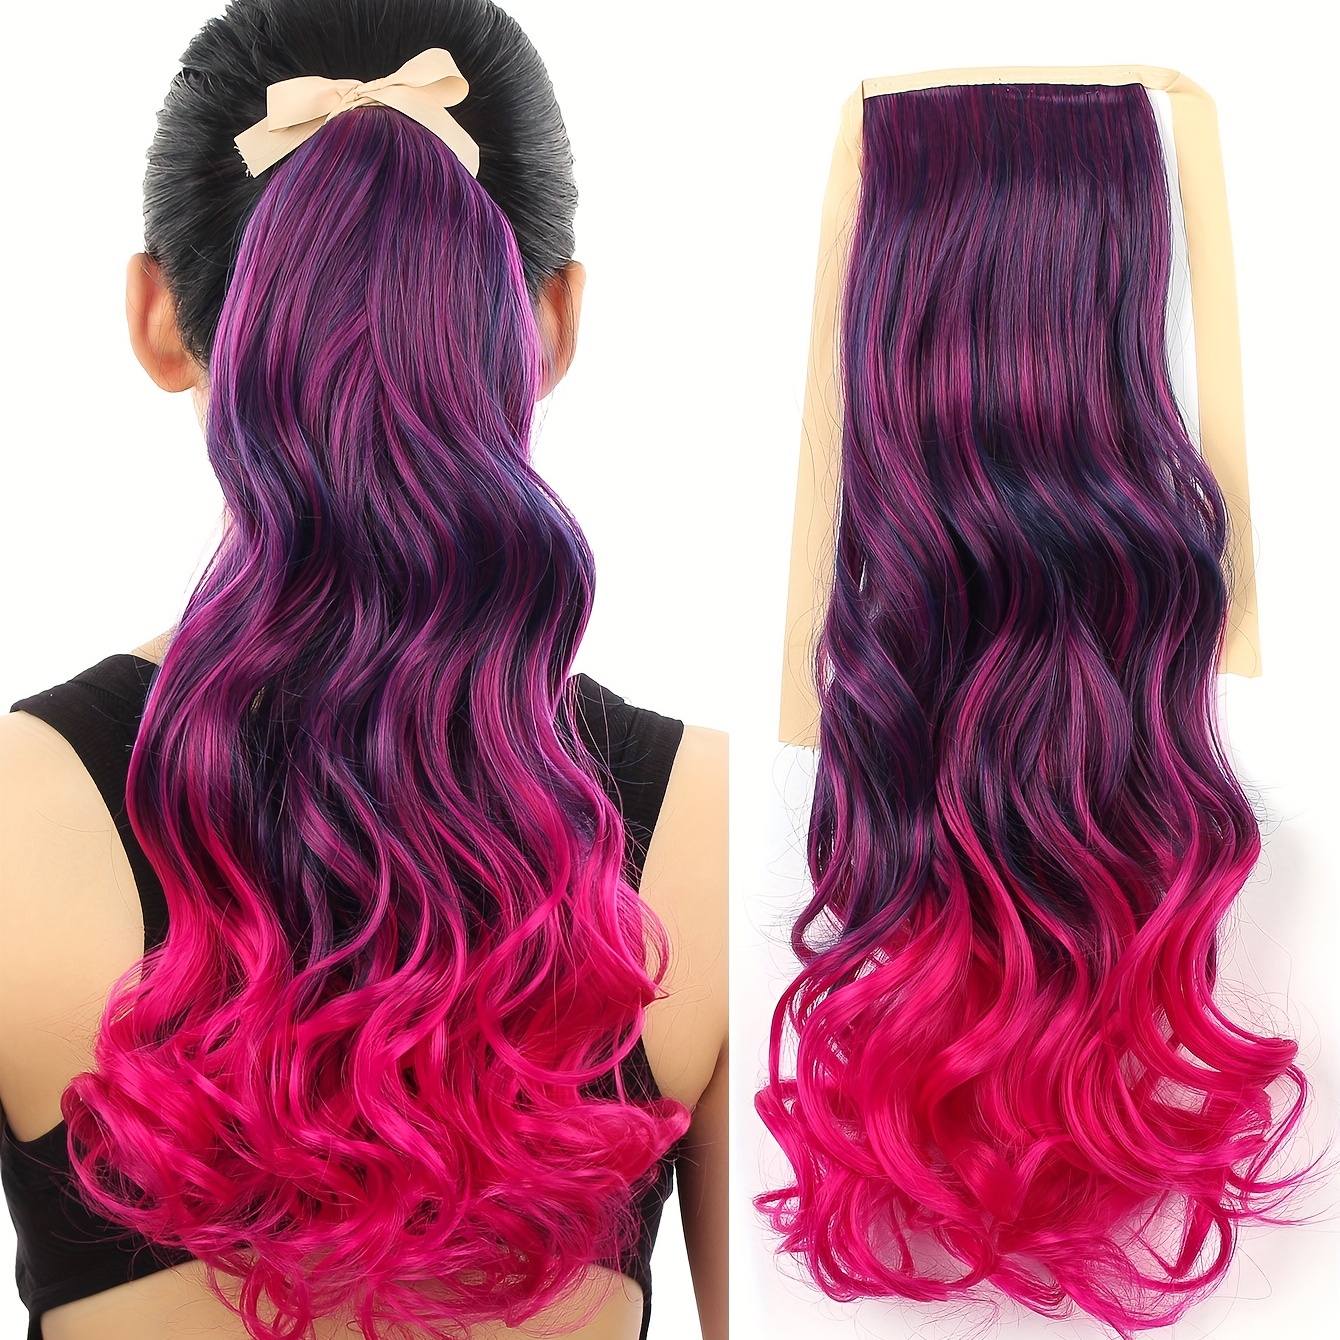 

Colorful Ombre Claw Clip-in Synthetic Hair Extensions For Women - Wavy Hairpiece For Cosplay, Parties, And Y2k Style Hair Accessories